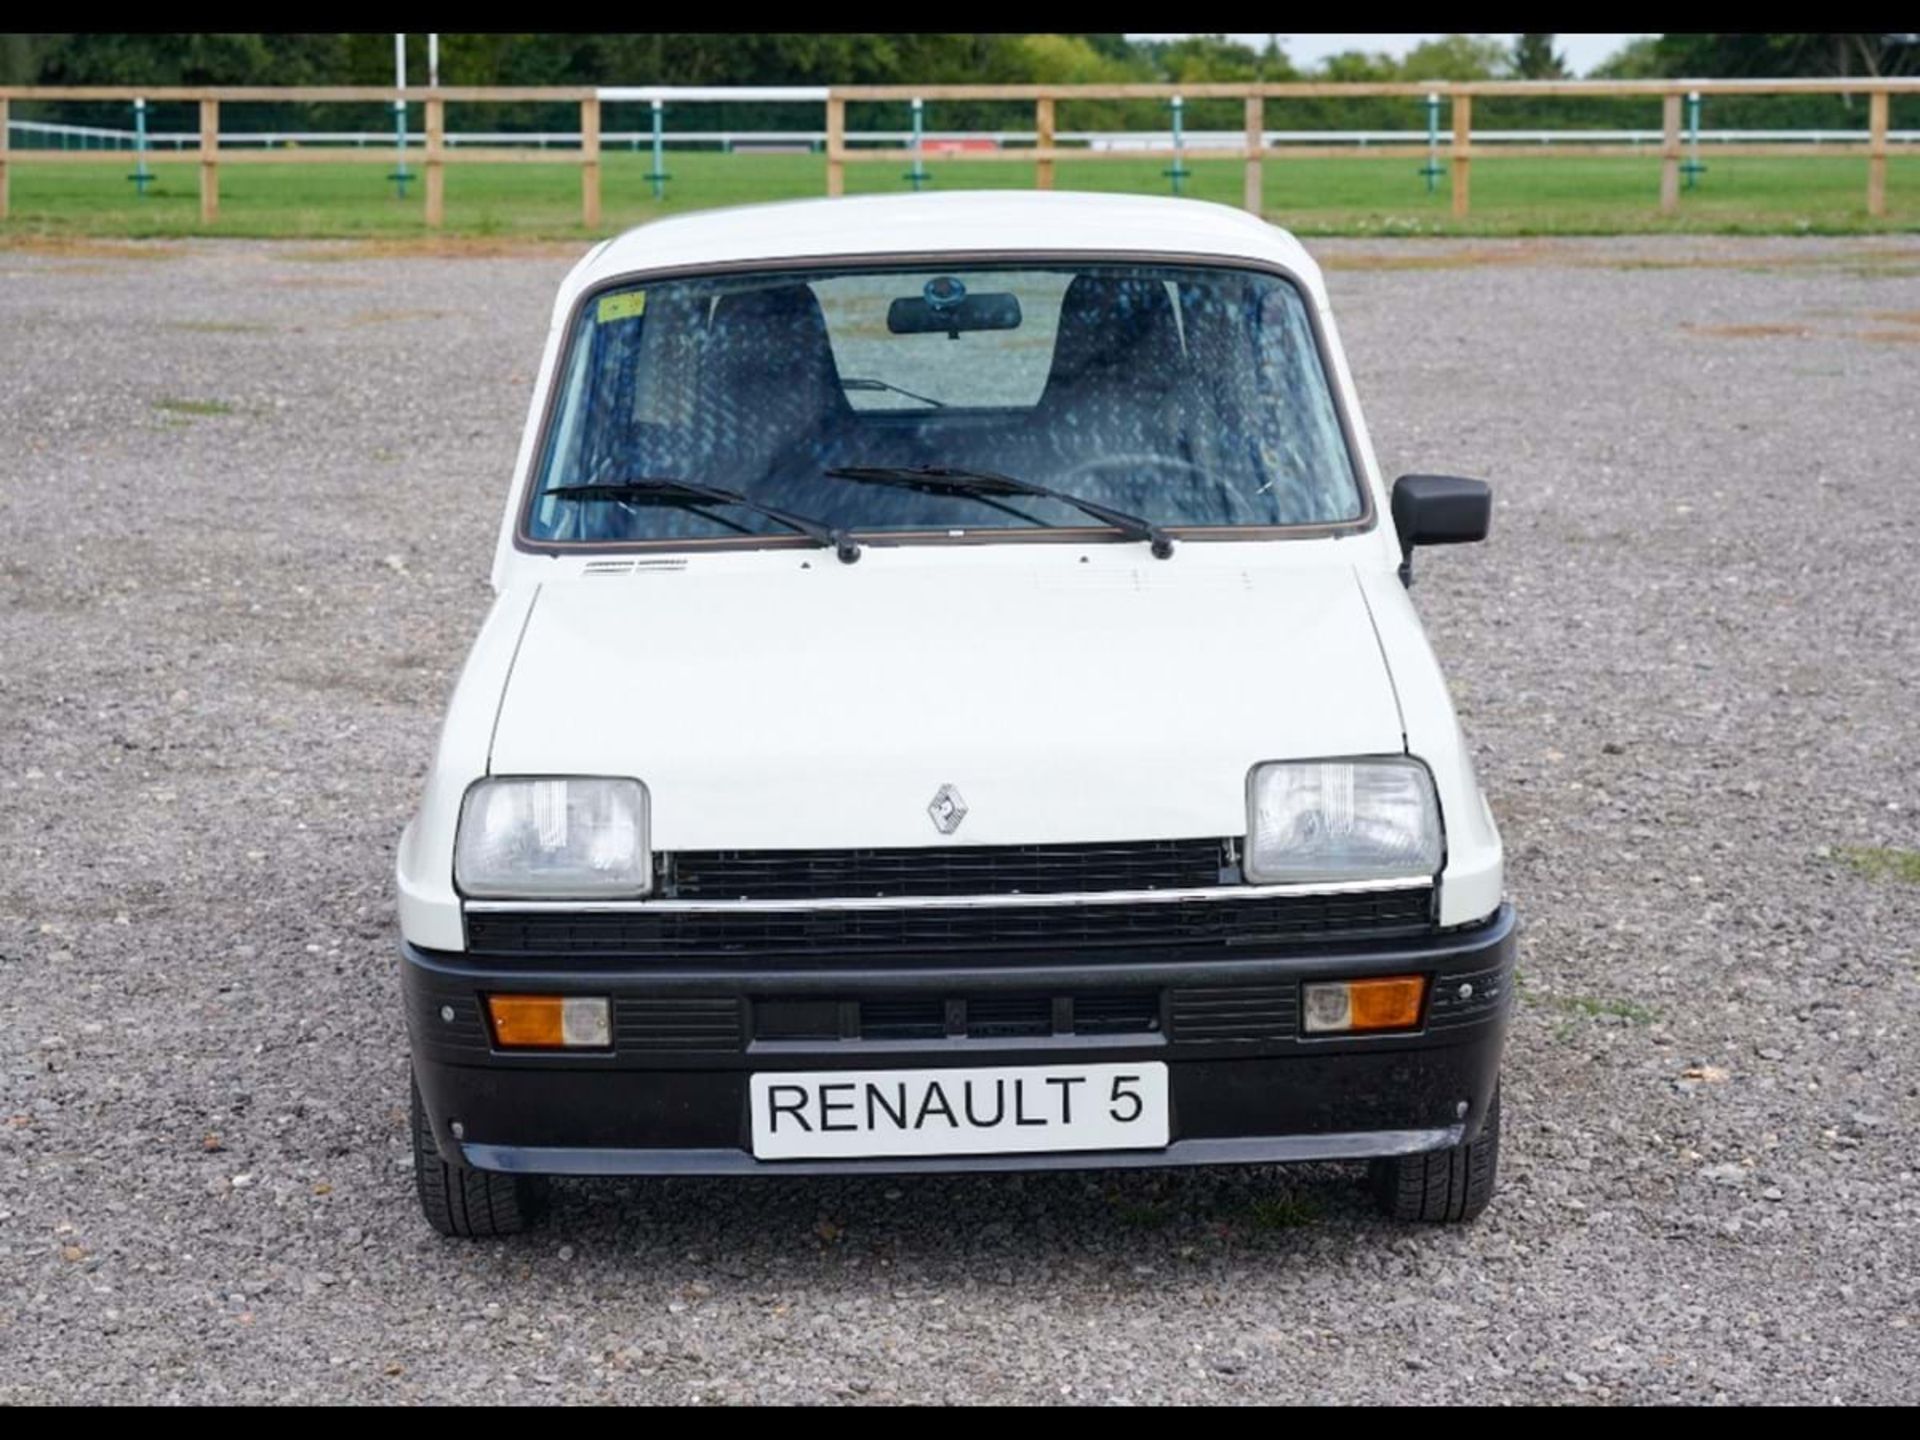 1984 Renault 5 - Image 5 of 17